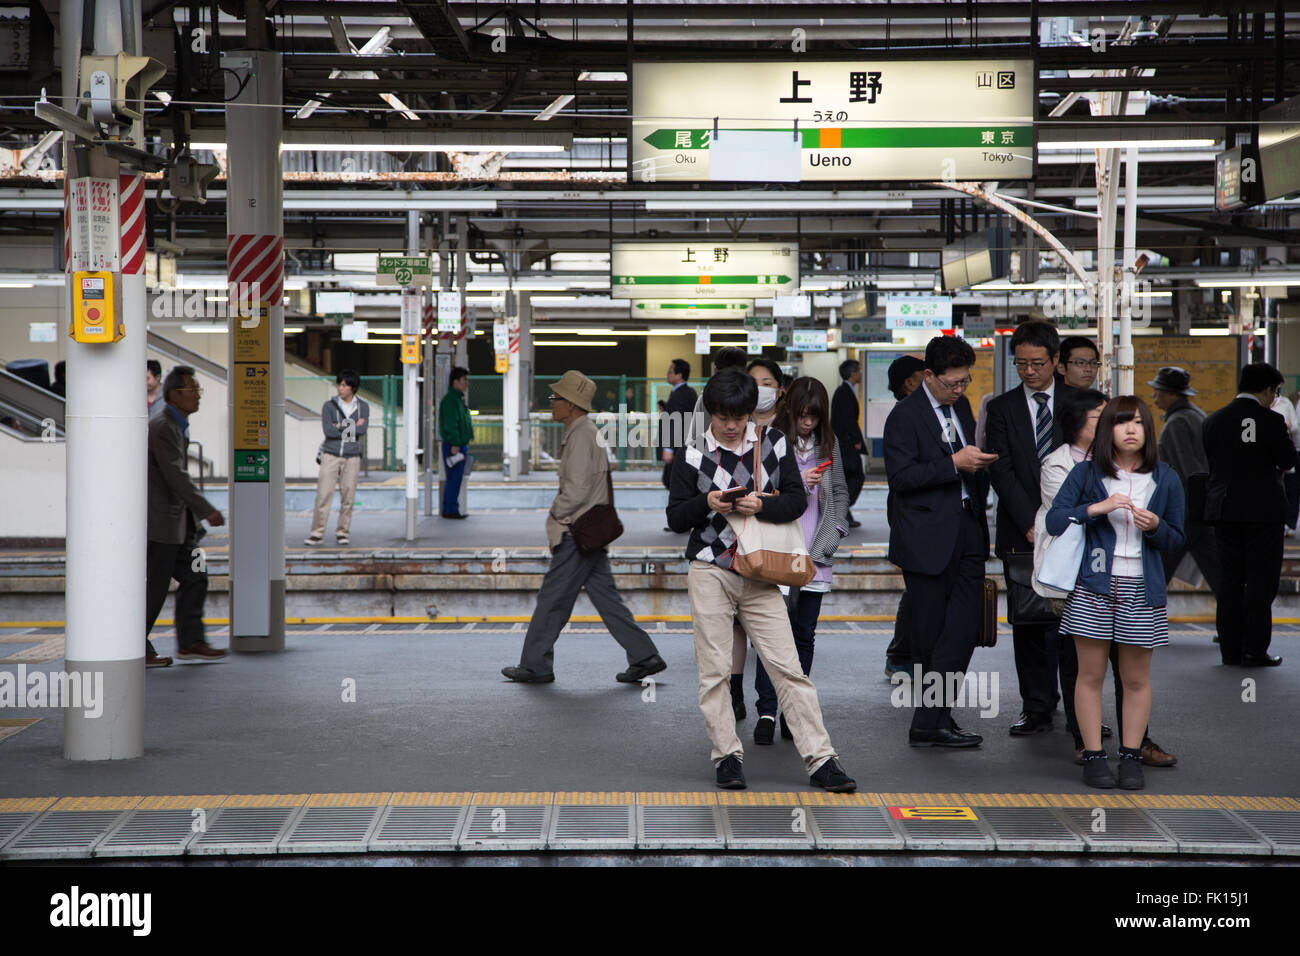 Commuters waiting for the metro at the Ueno metro station in Tokyo, Japan. Stock Photo